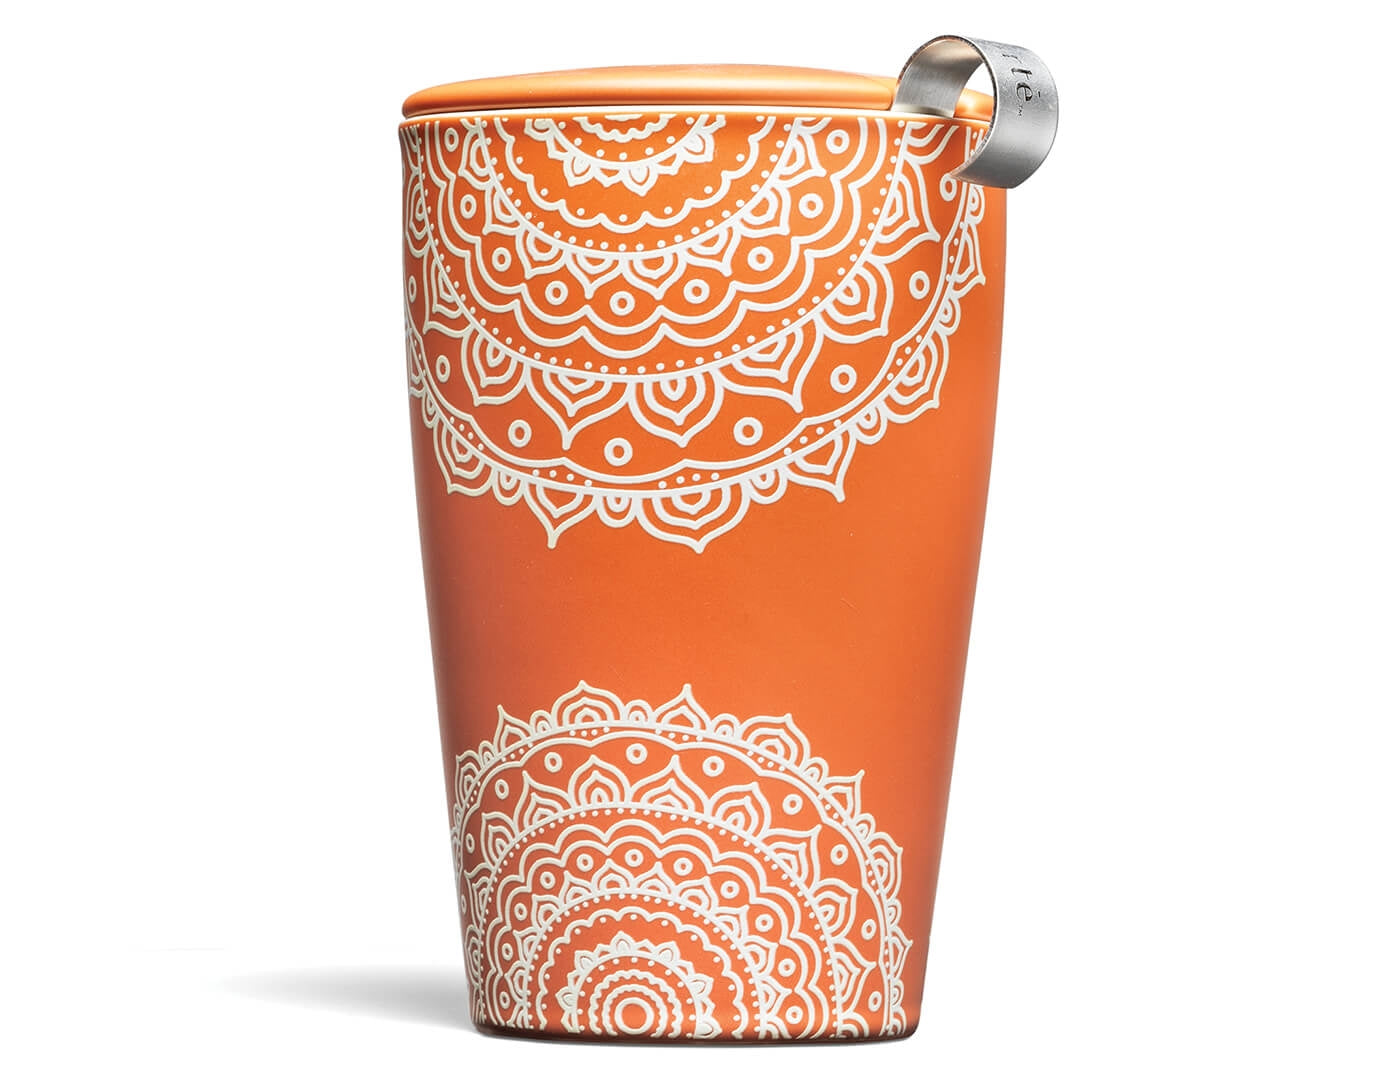 Chakra design KATI® Steeping cup with infuser showing closeup of cup